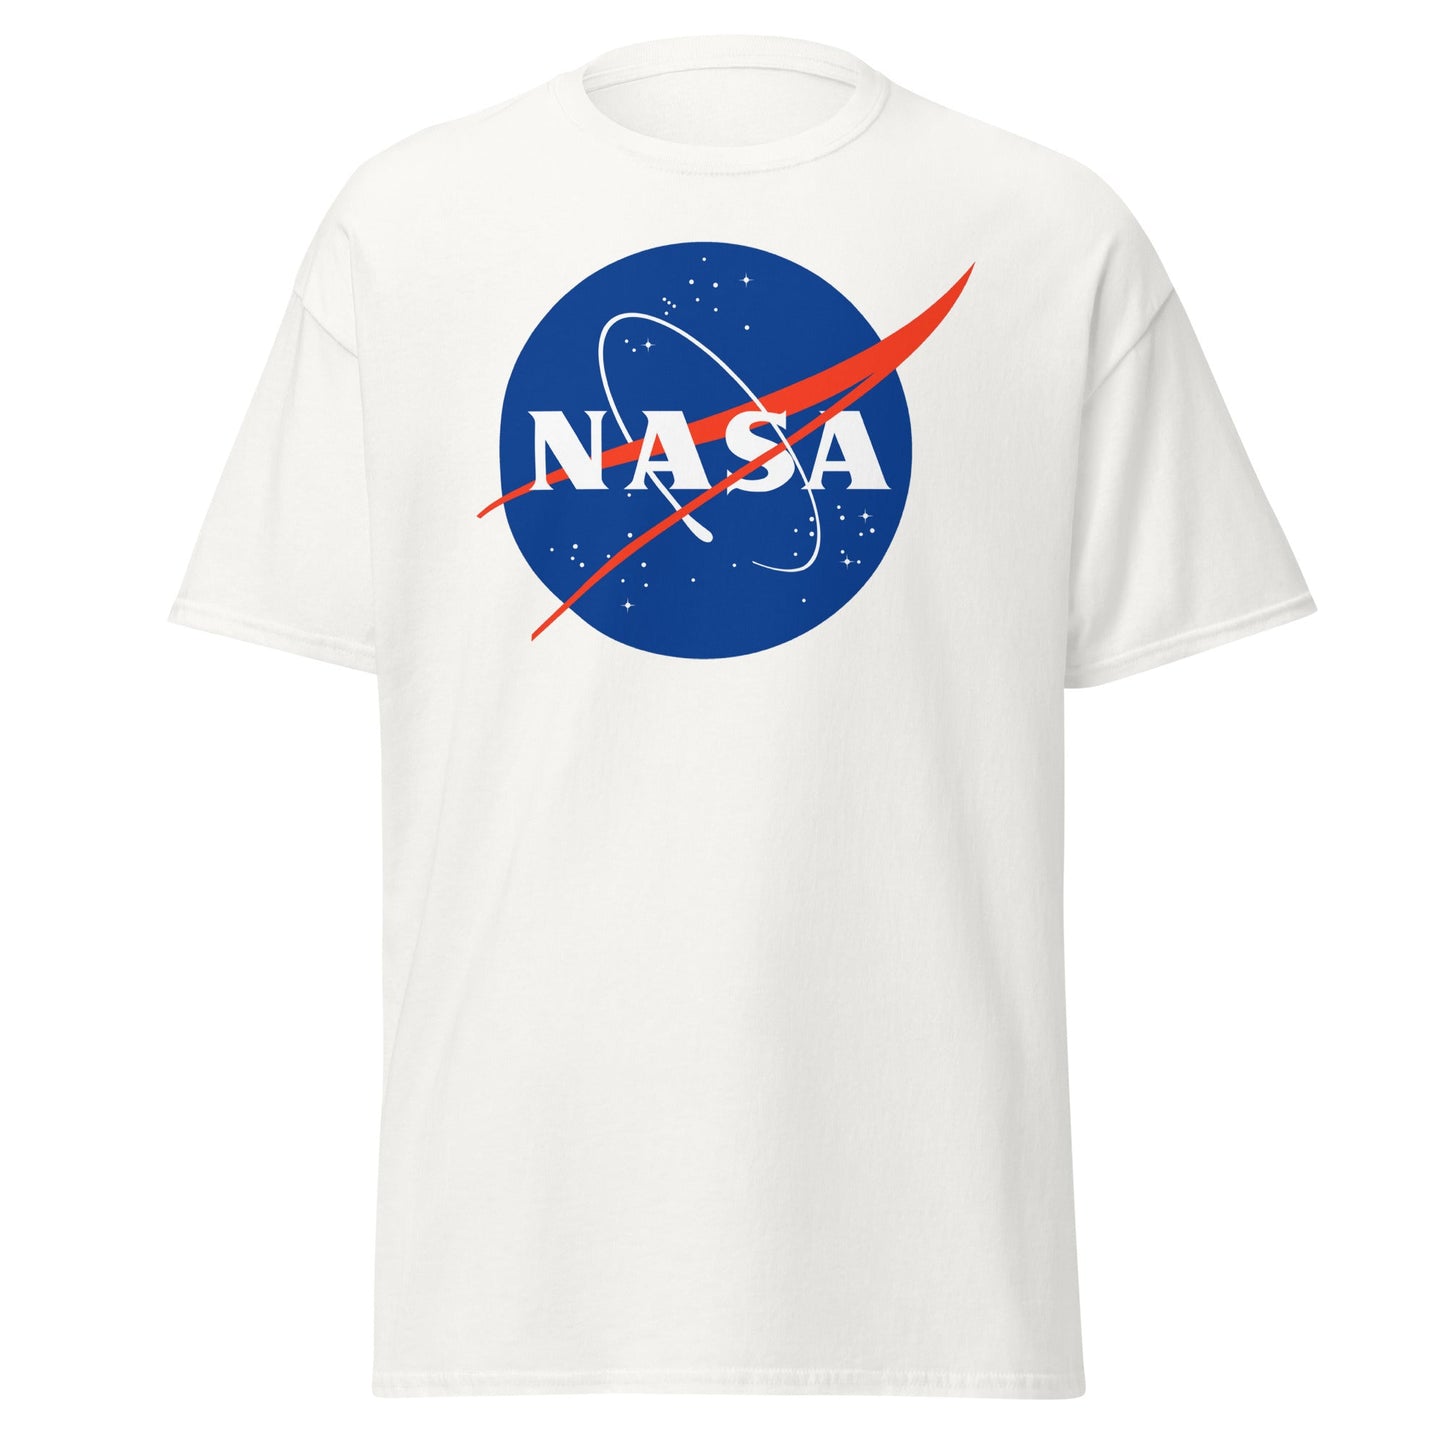 NASA Meatball Logo Men's T-Shirt: Official Space Agency Graphic Tee for Science Enthusiasts